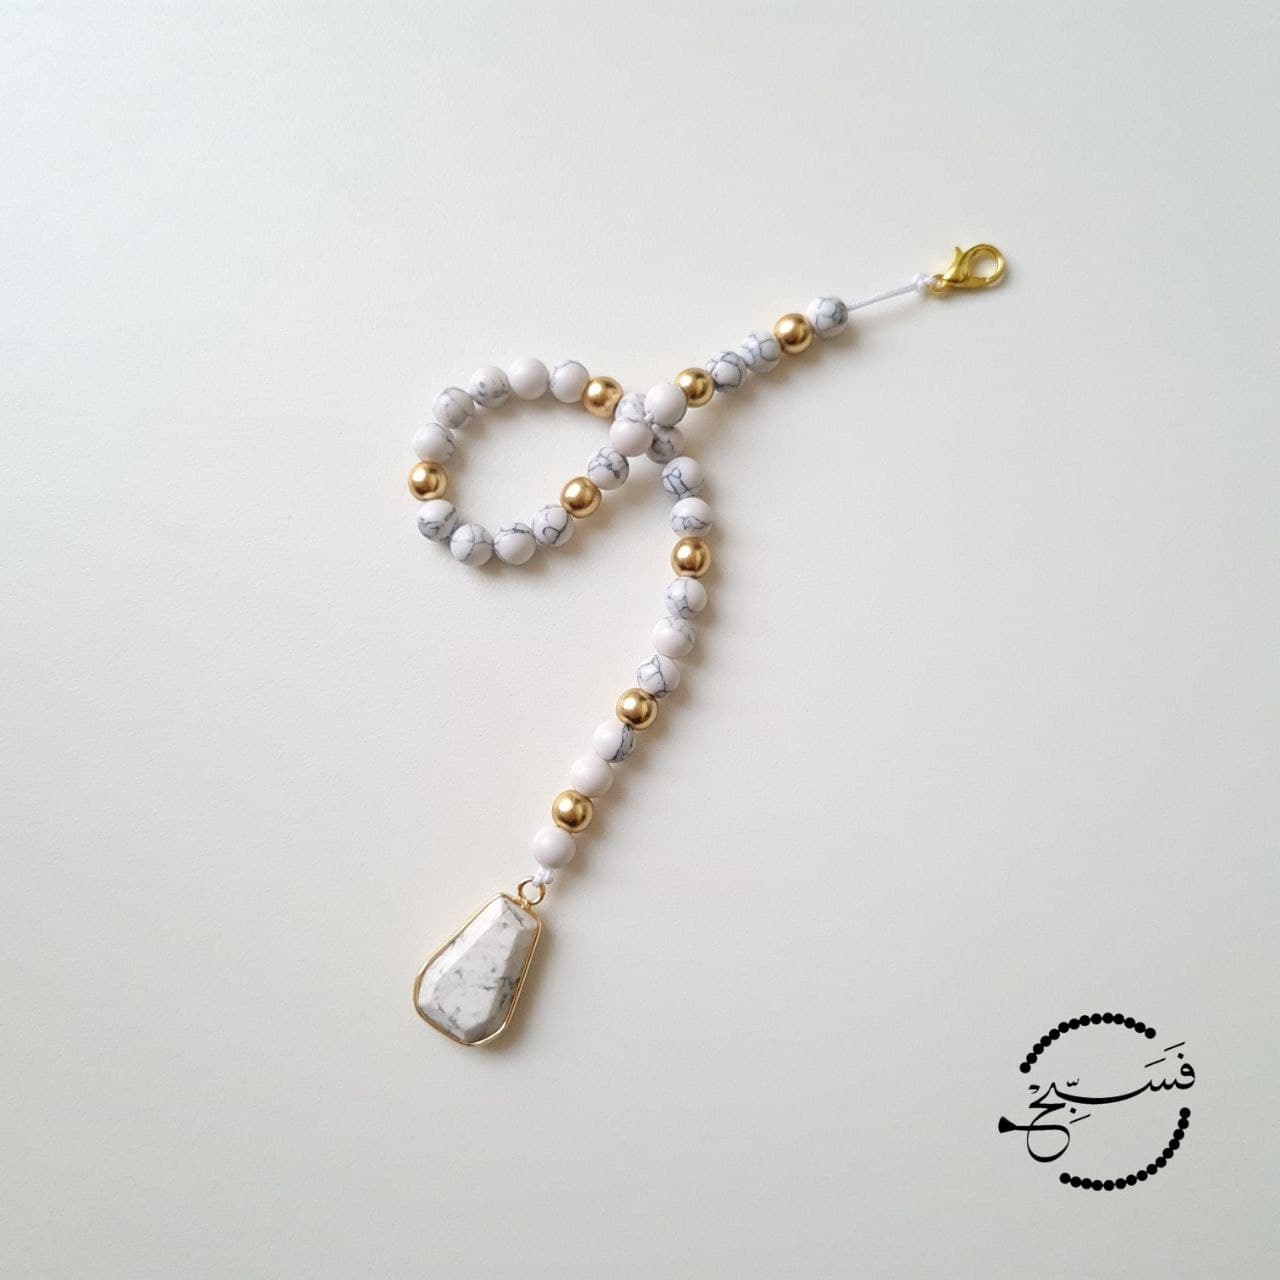 Stunning white howlite & matte gold beads paired with a white howlite pendant.   33 bead tasbih that can be clipped onto your bag.   Packaged in a luxurious pouch and a gift box.